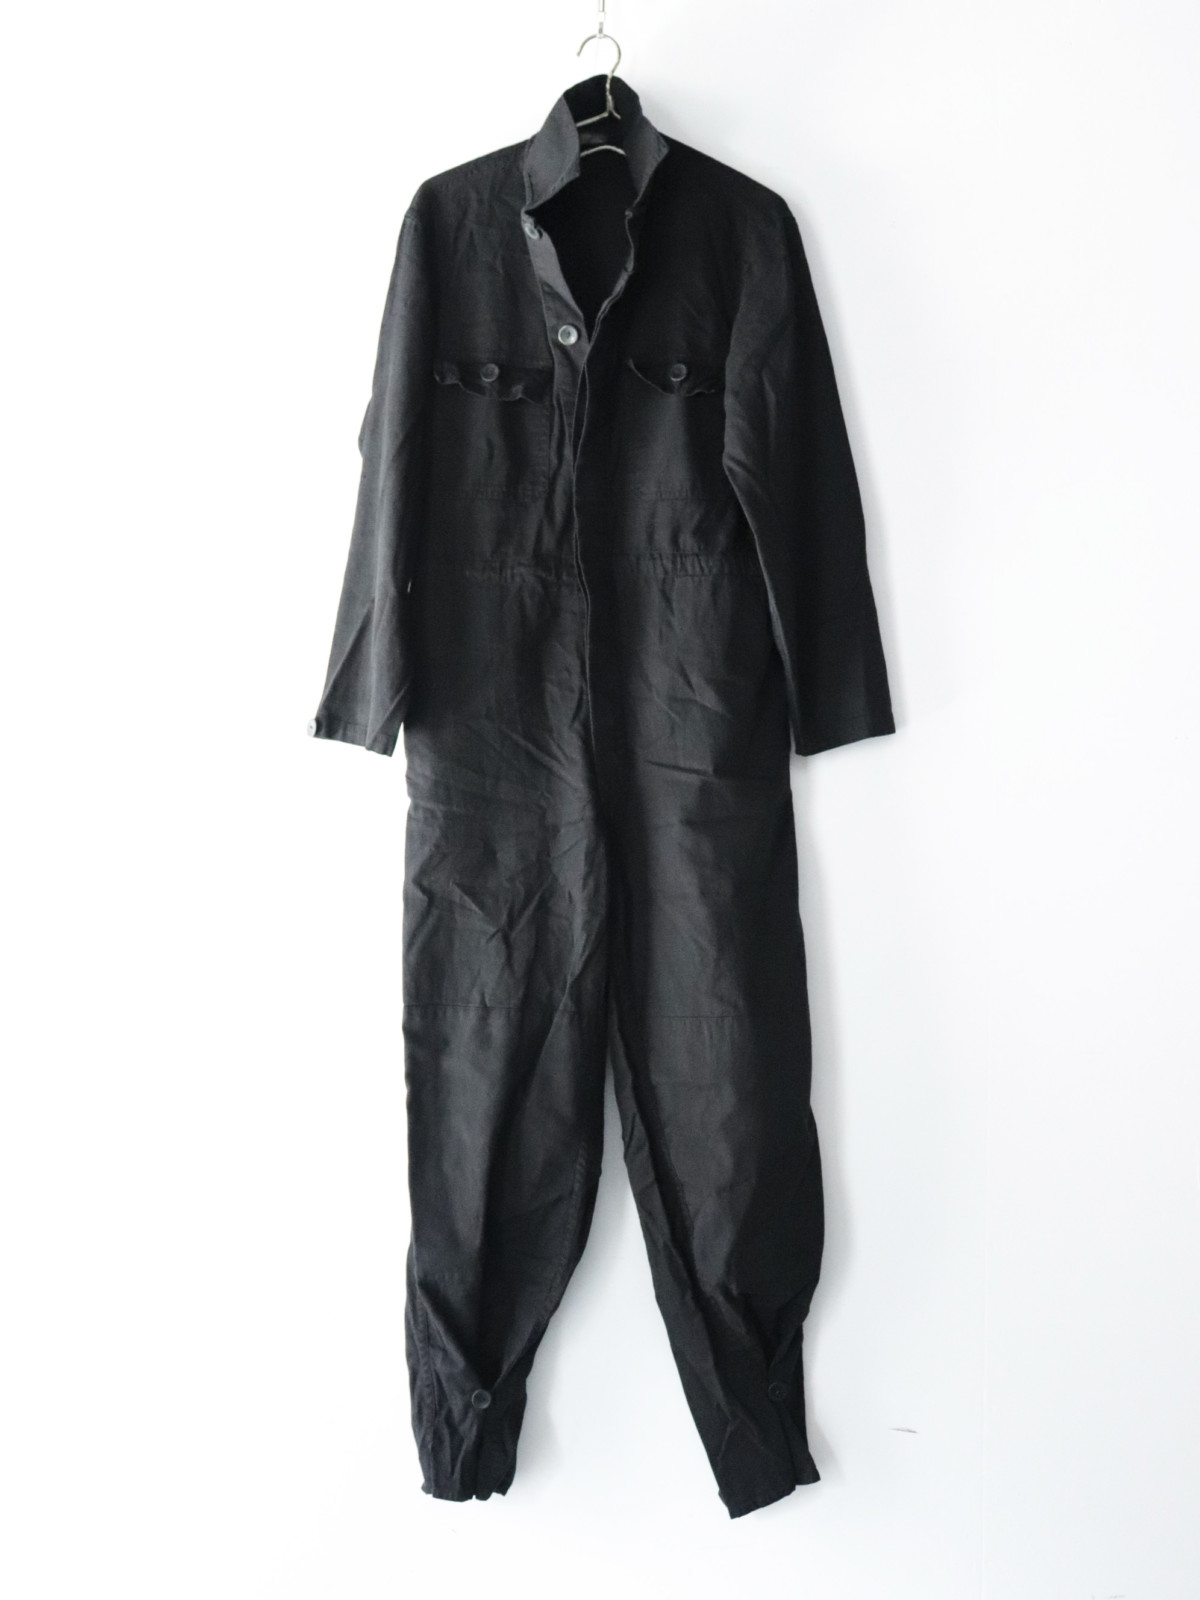 Vintage ,cotton ,work, all in one ,Black-dyed